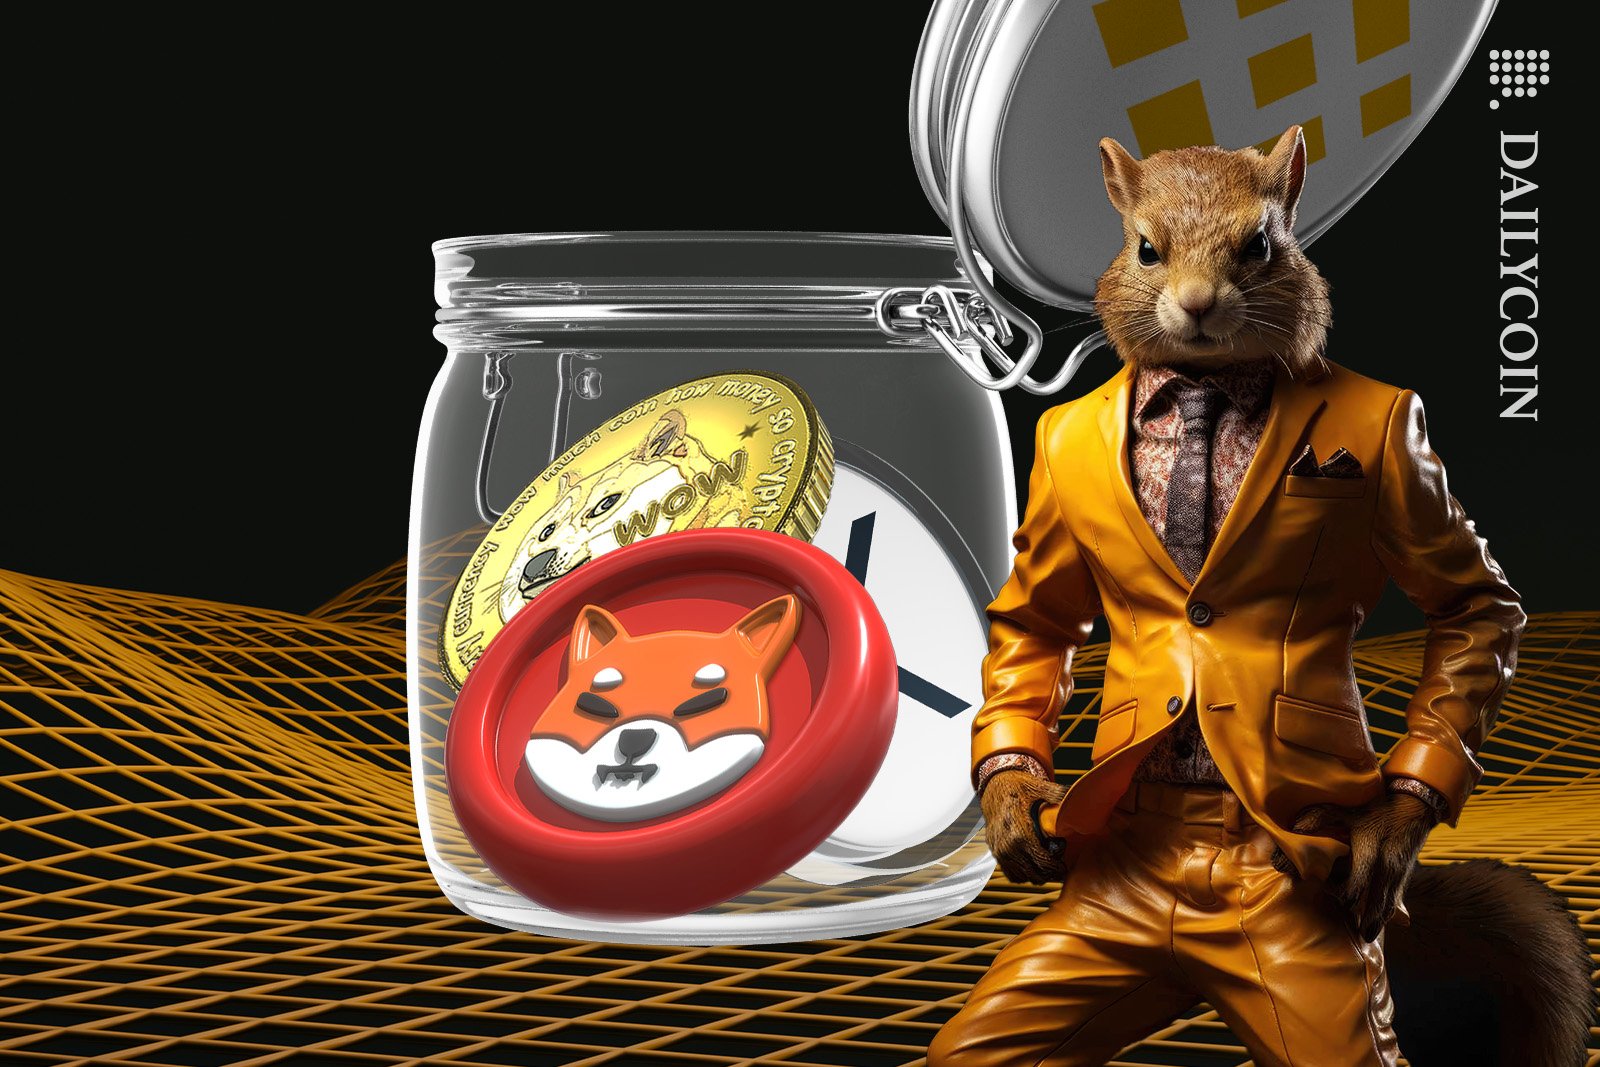 Squirrel working for binance is topping up reserves with Shib token, Doge and XRP.